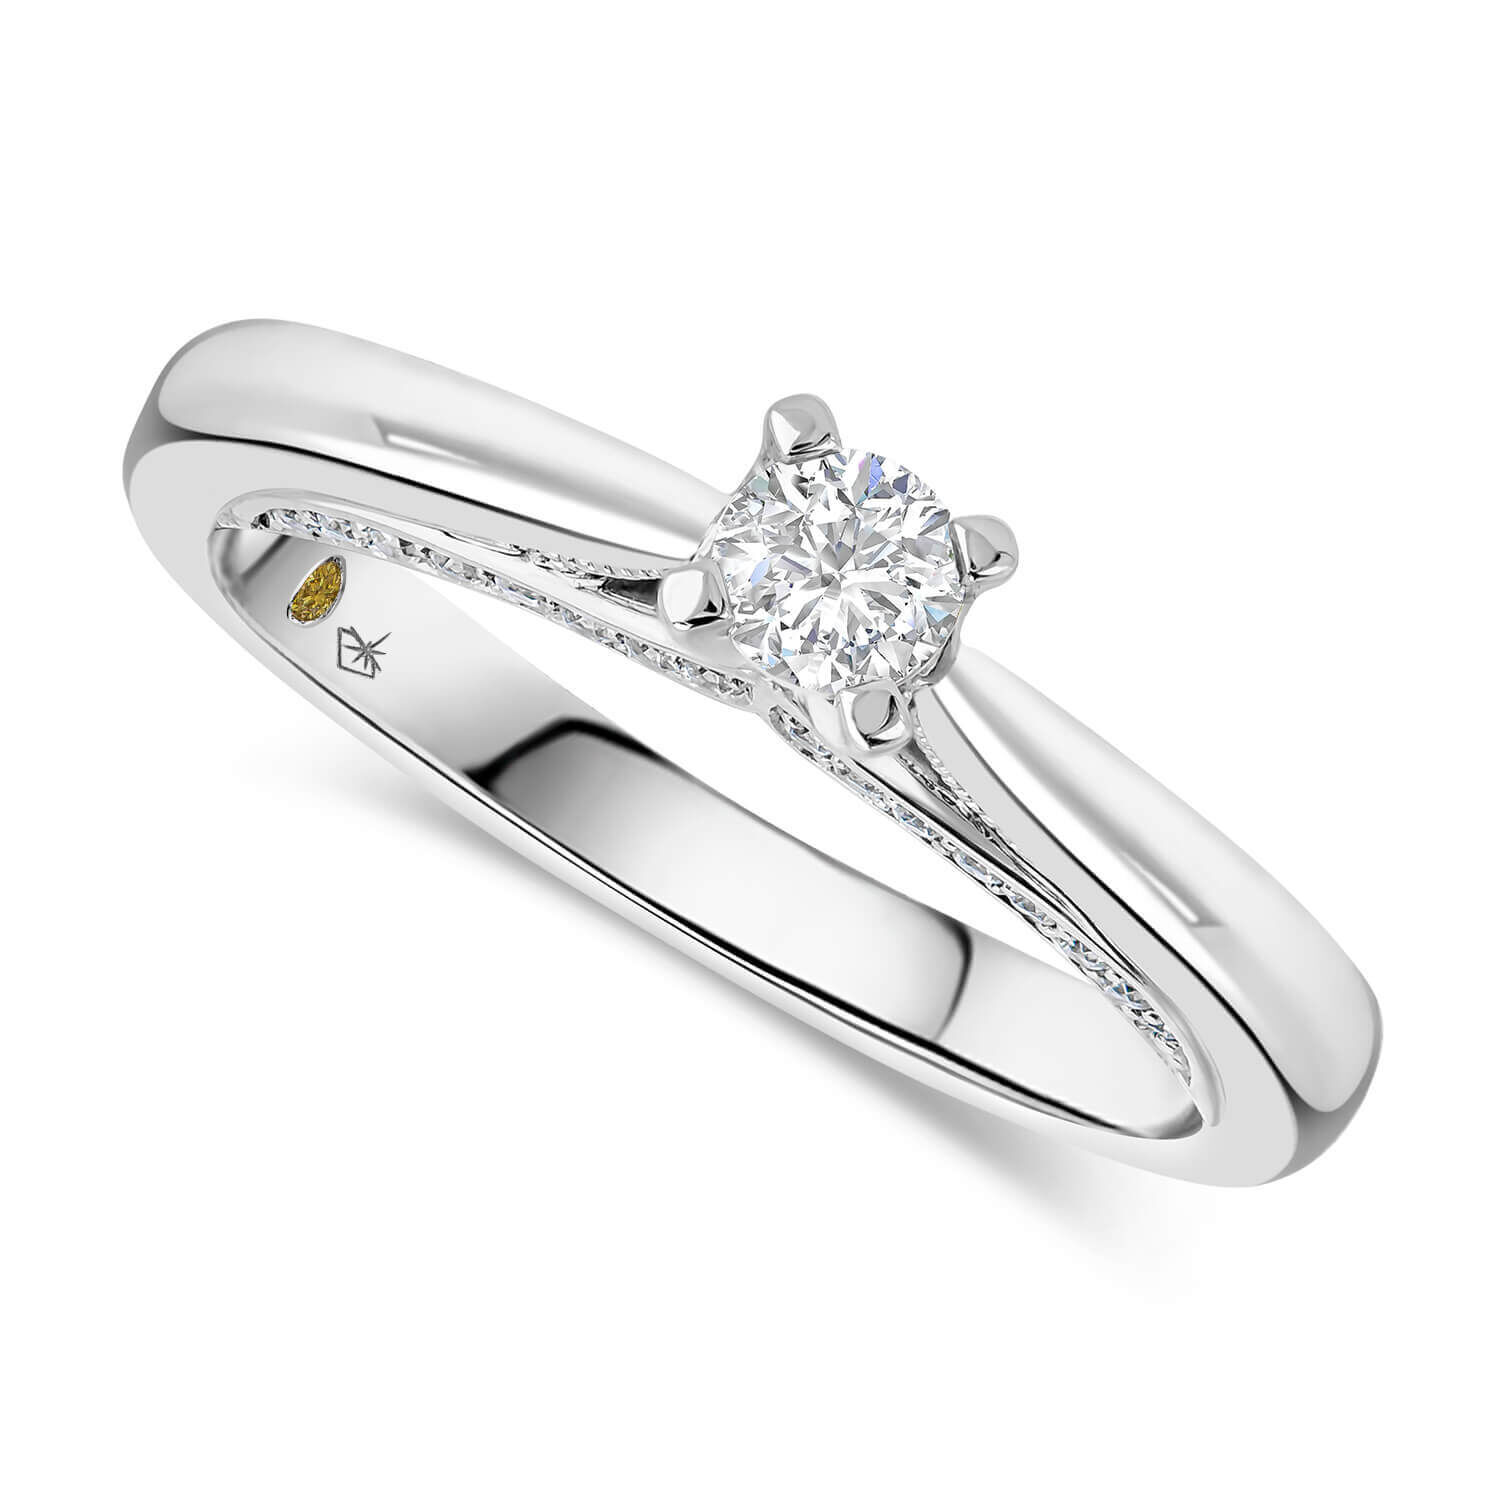 Fraser Hart - At Fraser Hart, we love being able to help you find the  perfect engagement ring for the love of your life 💍 We have a wide range  of exclusive